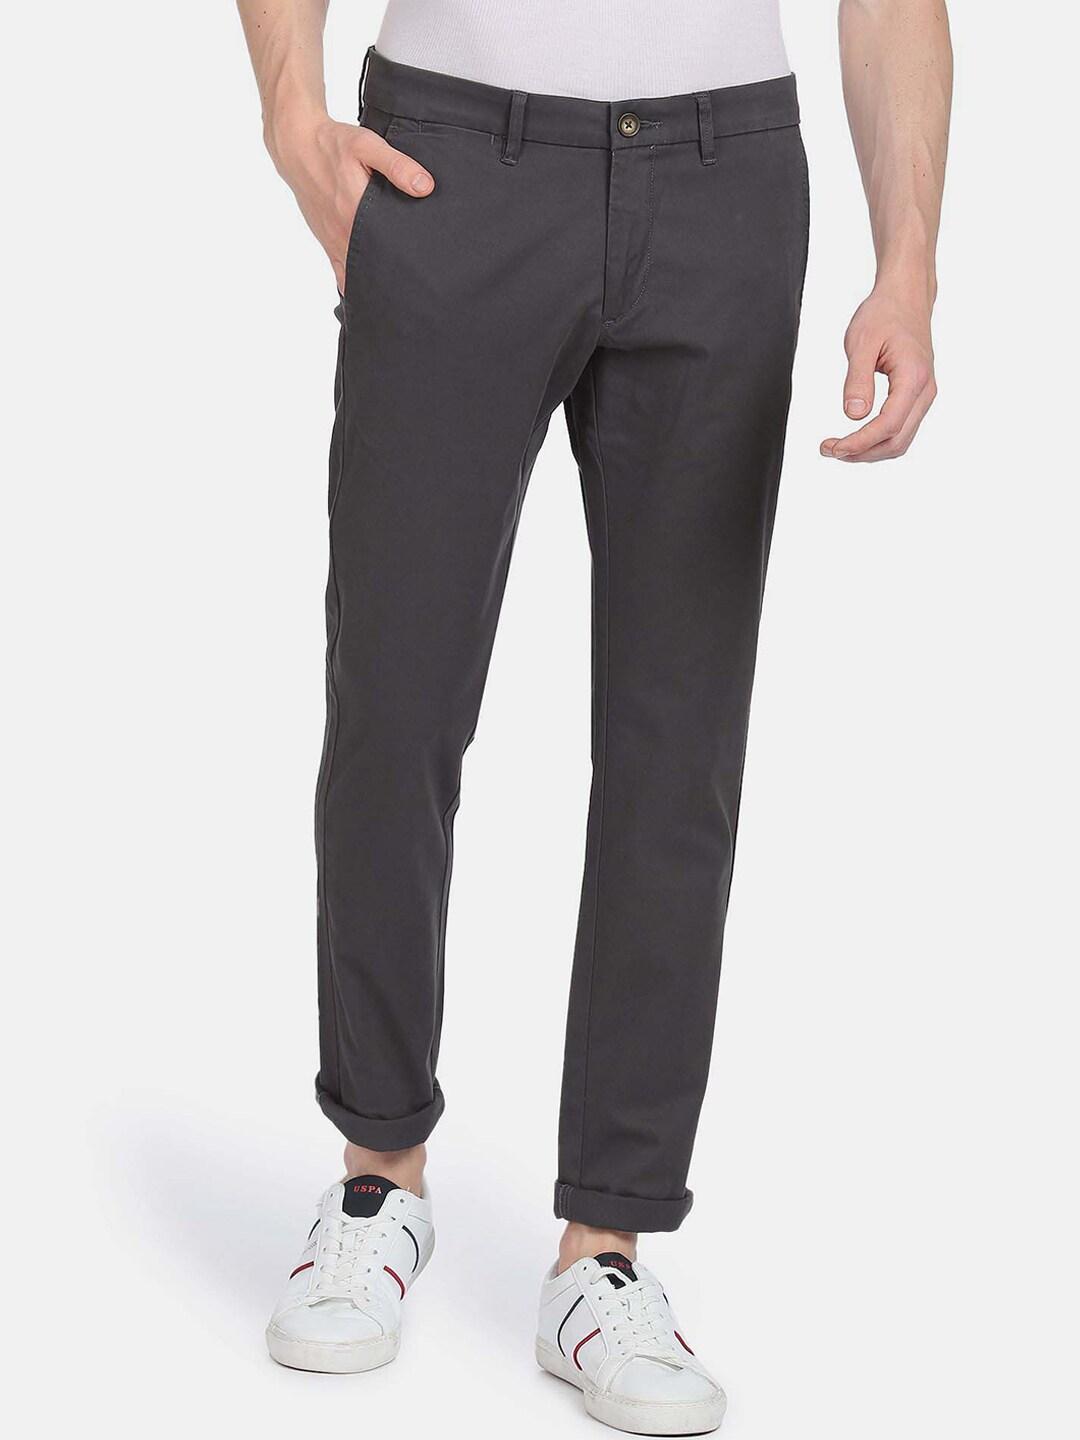 U.S. Polo Assn. Men Slim Fit Causal Trousers